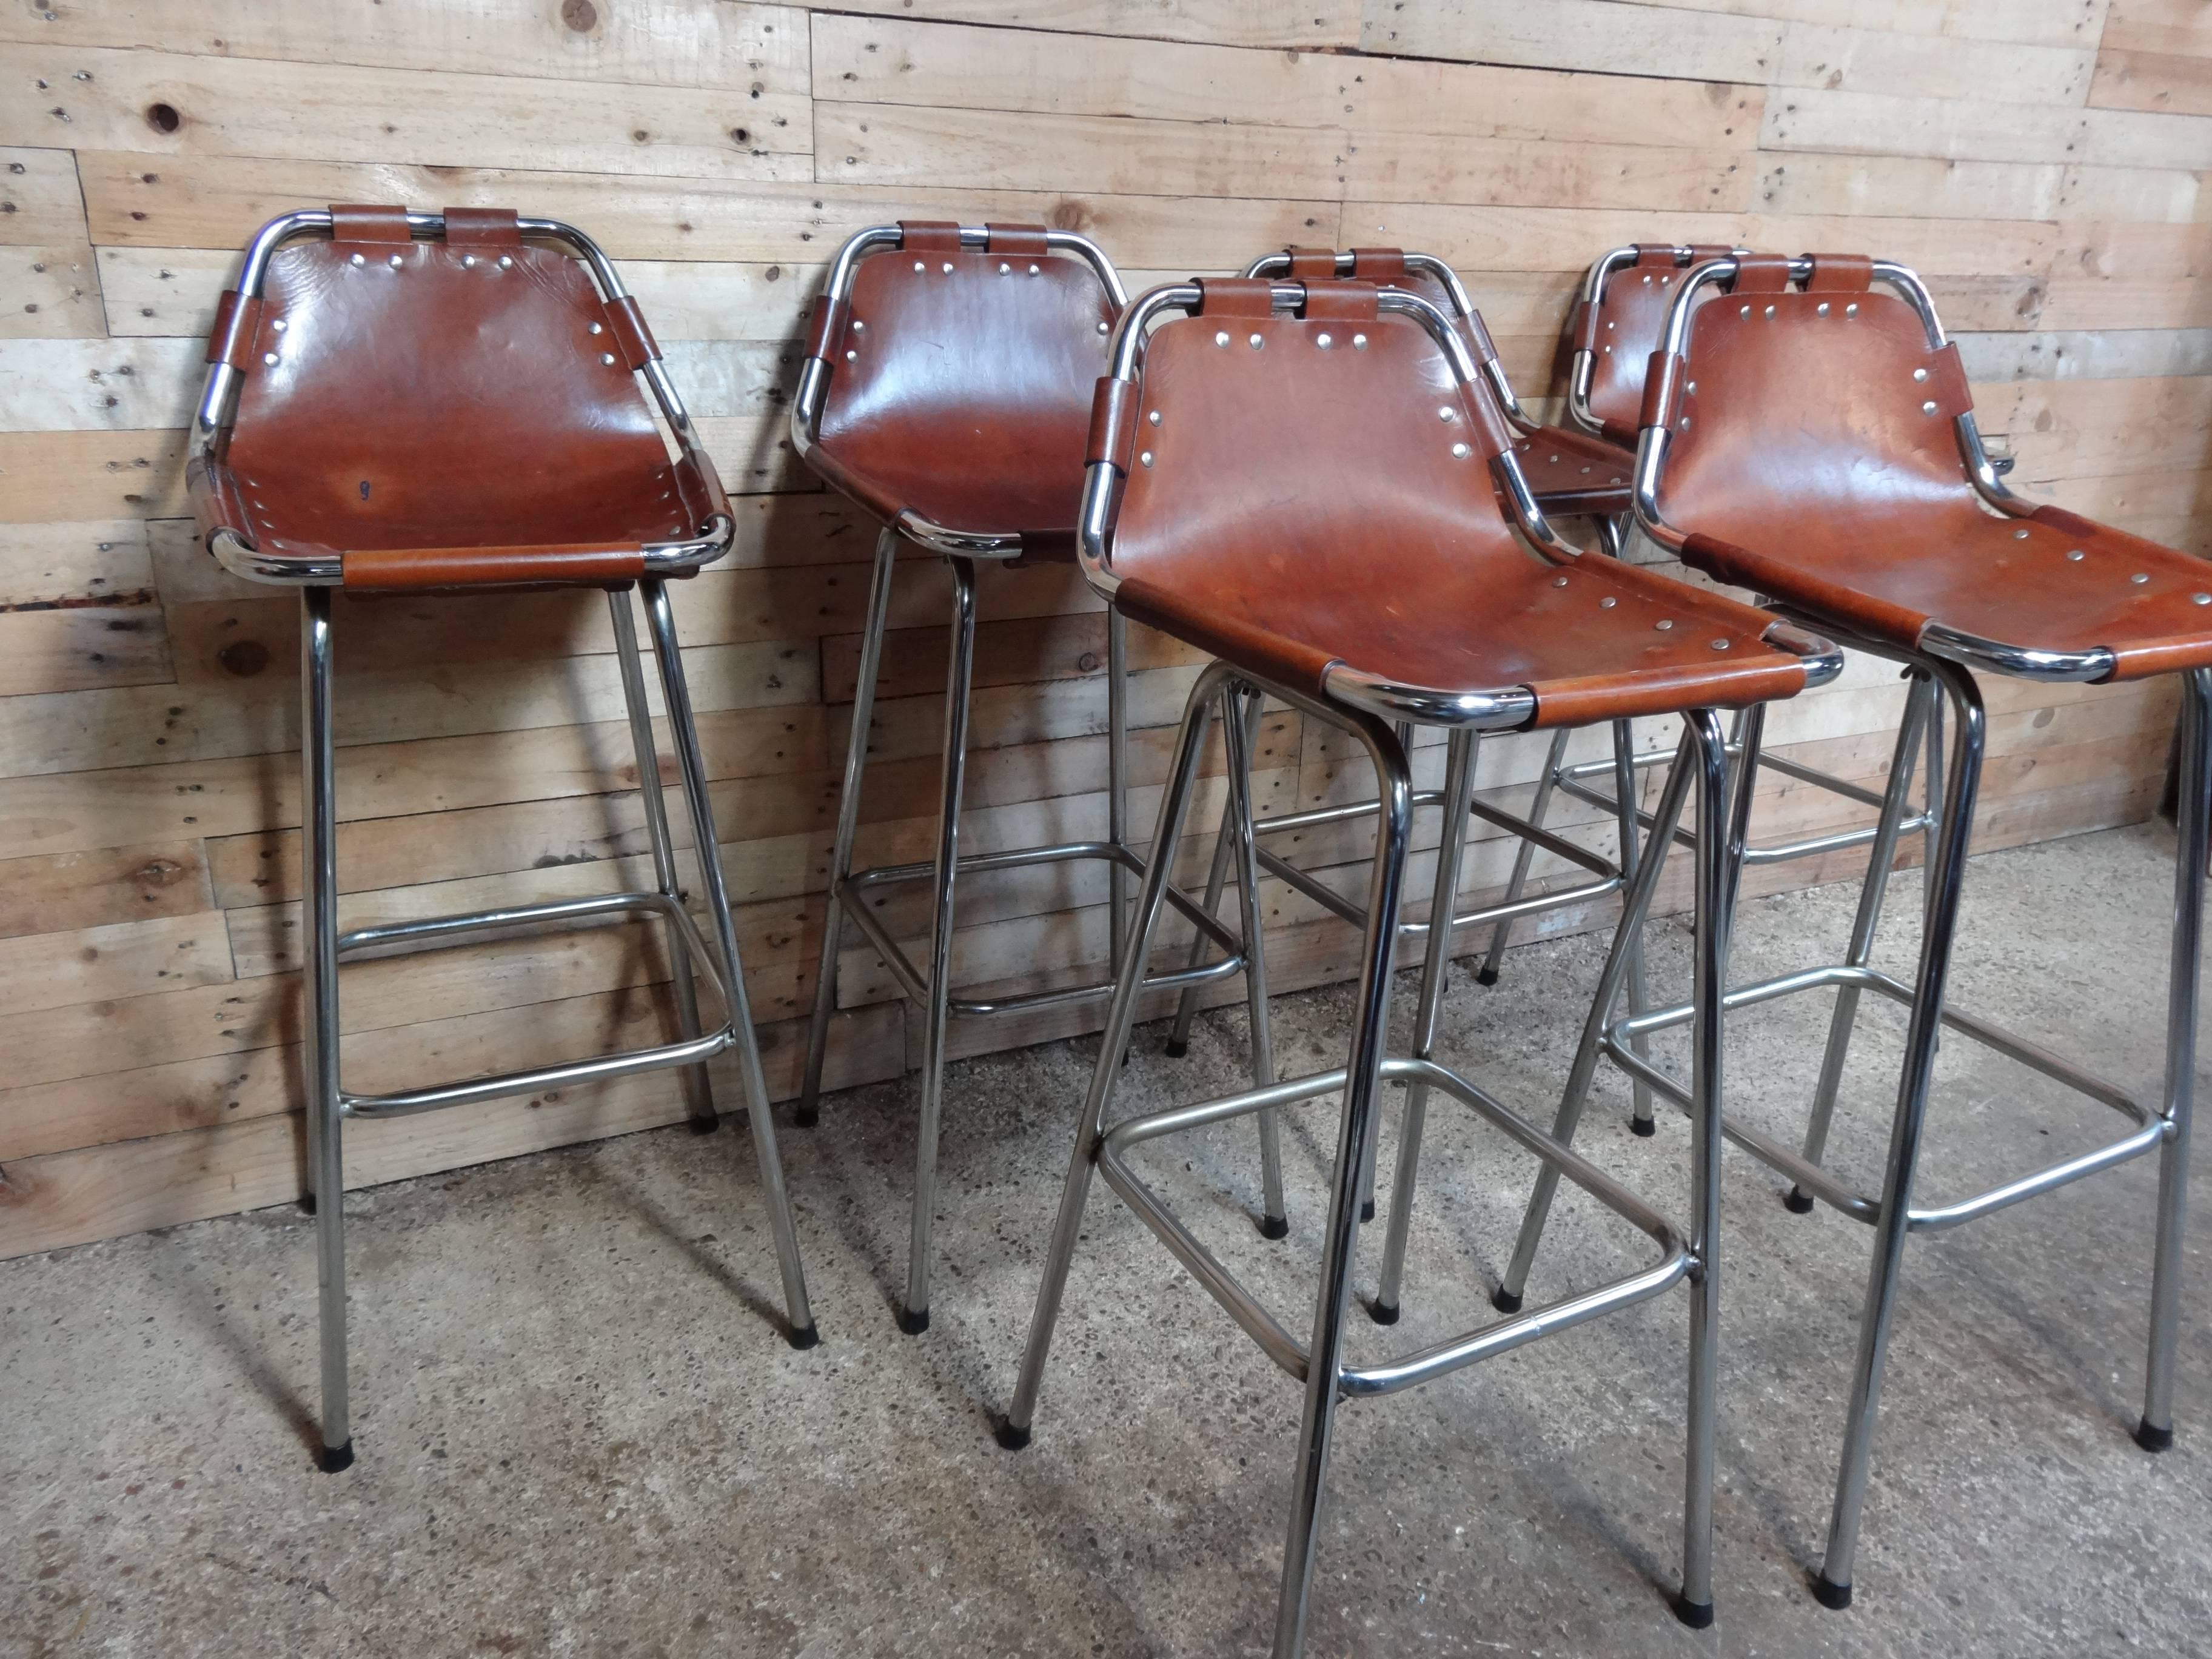 French Selected by Charlotte Perriand for the Les Arcs Ski Resort, Six High Bar Stools